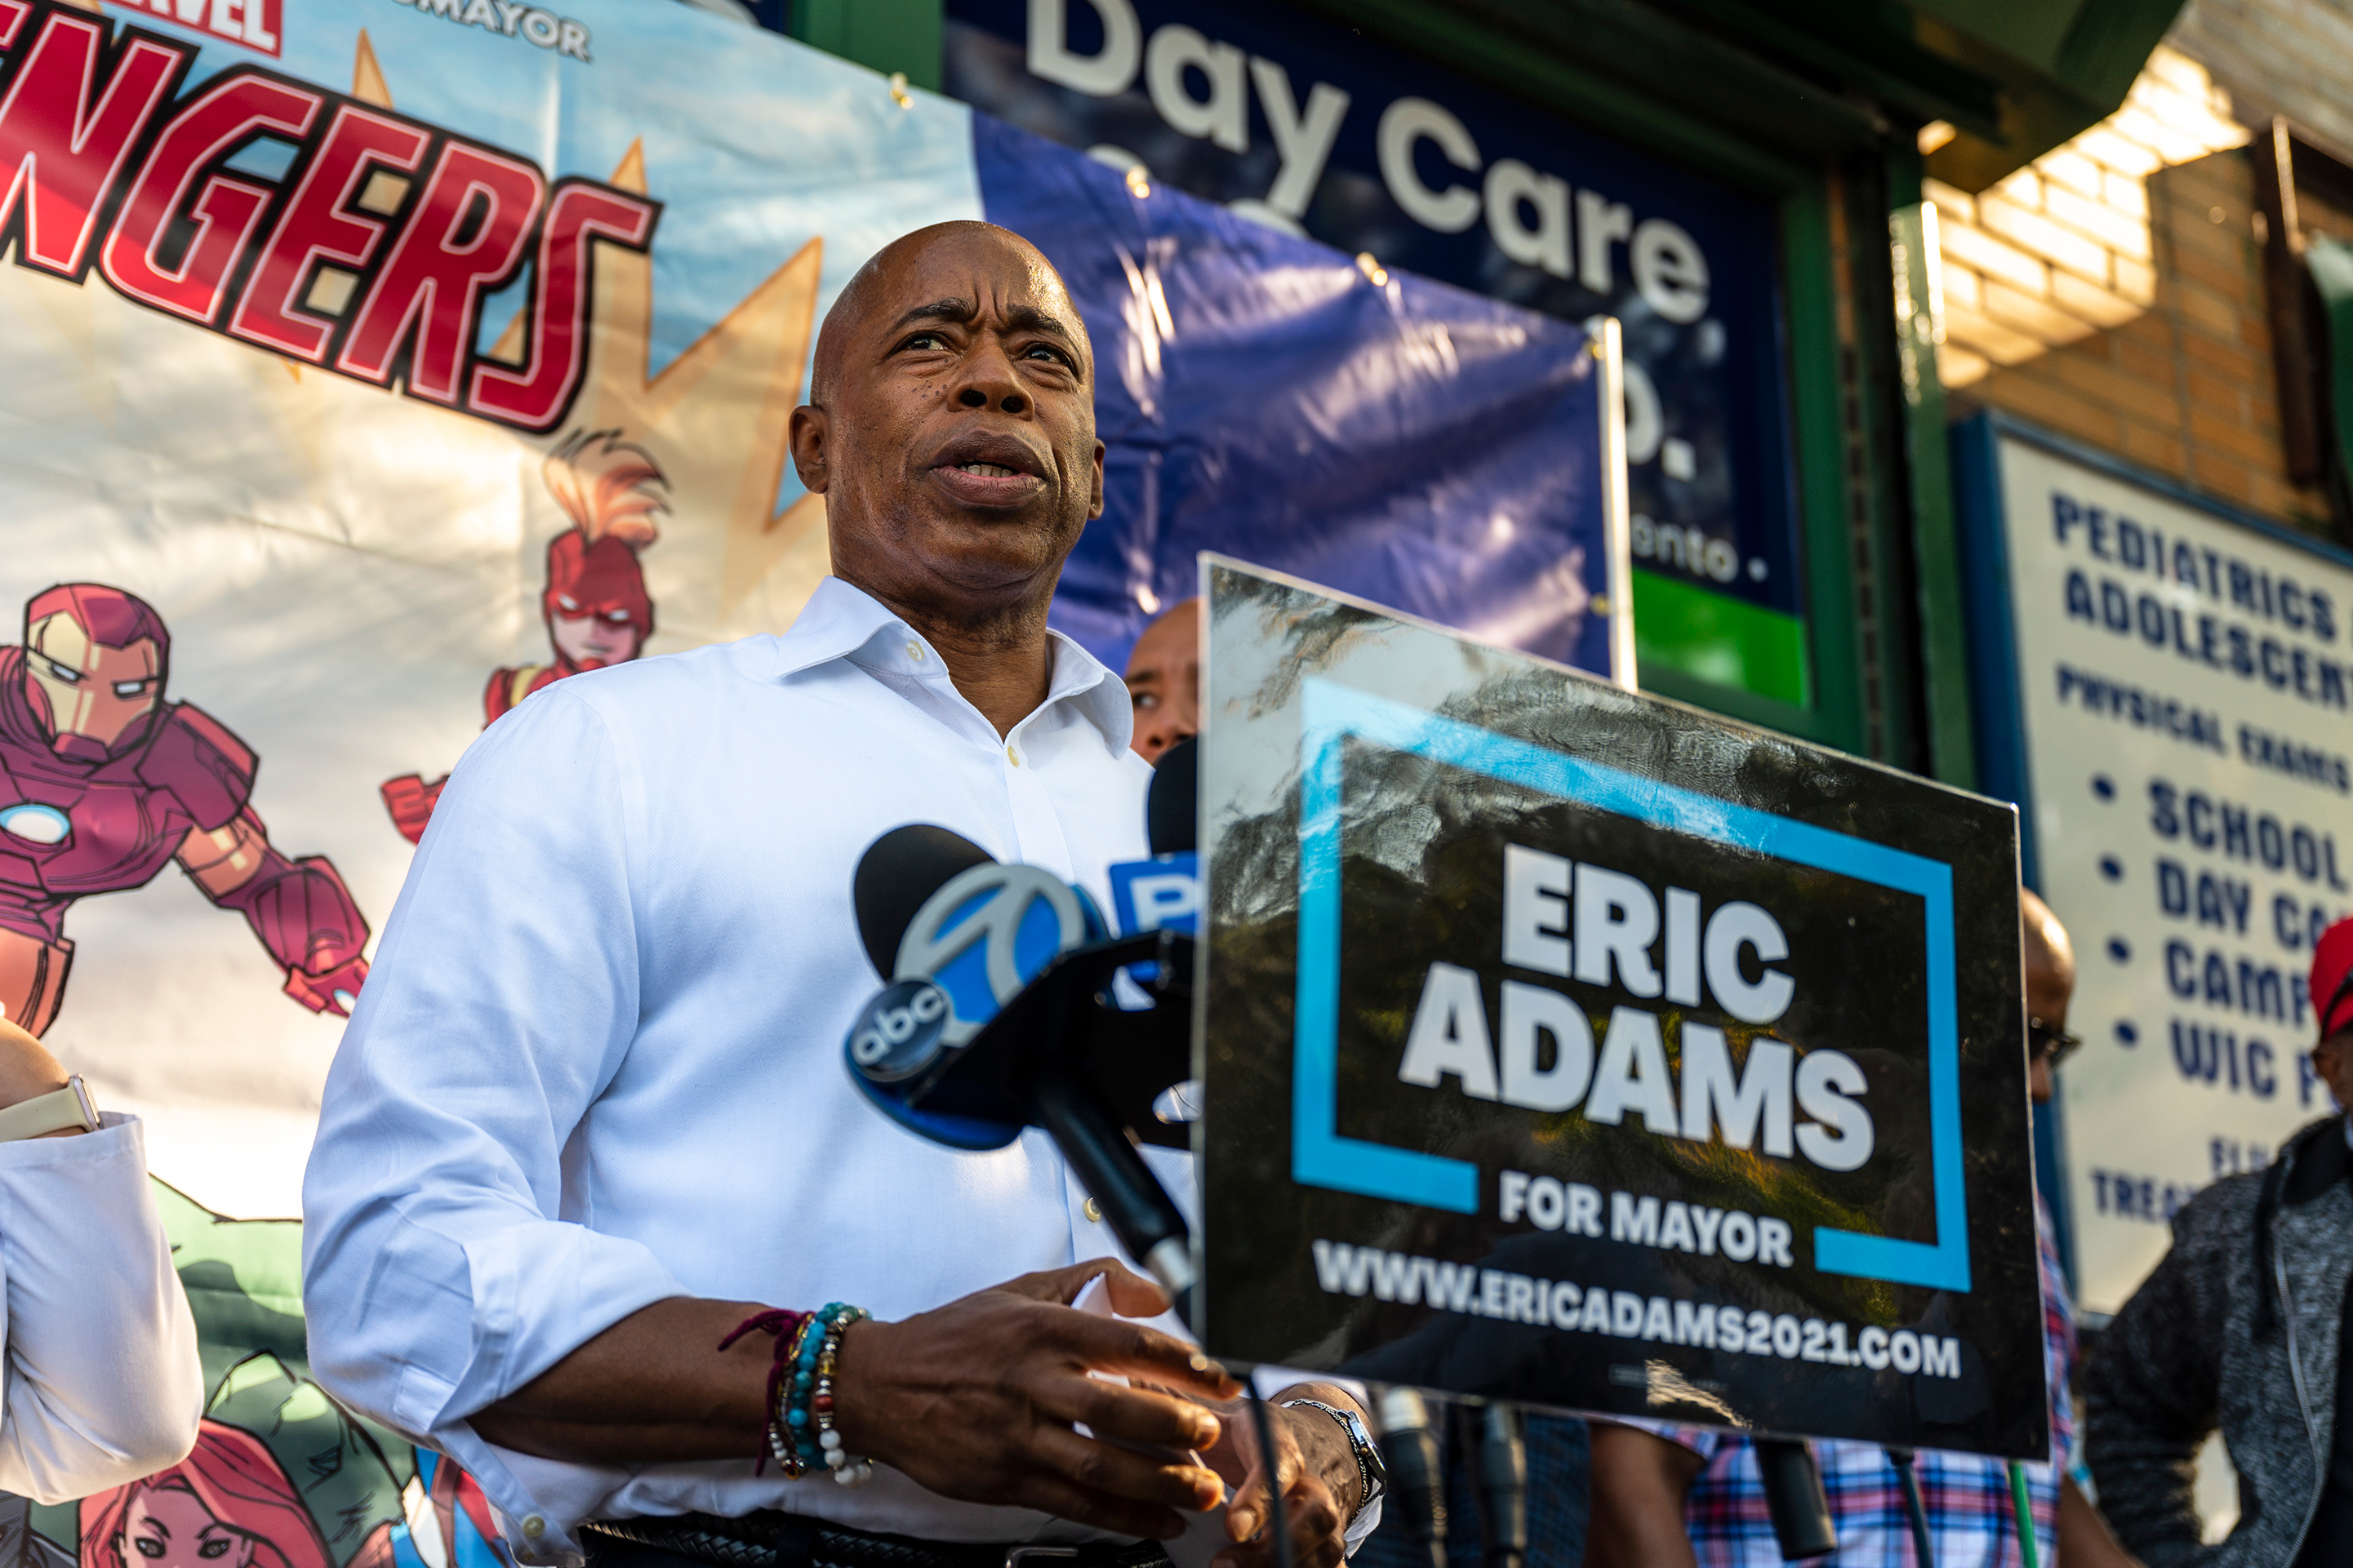 Brooklyn Borough President Eric Adams holds a mayoral campaign event at First Step Medical in Crotona, The Bronx, Oct. 15, 2021.